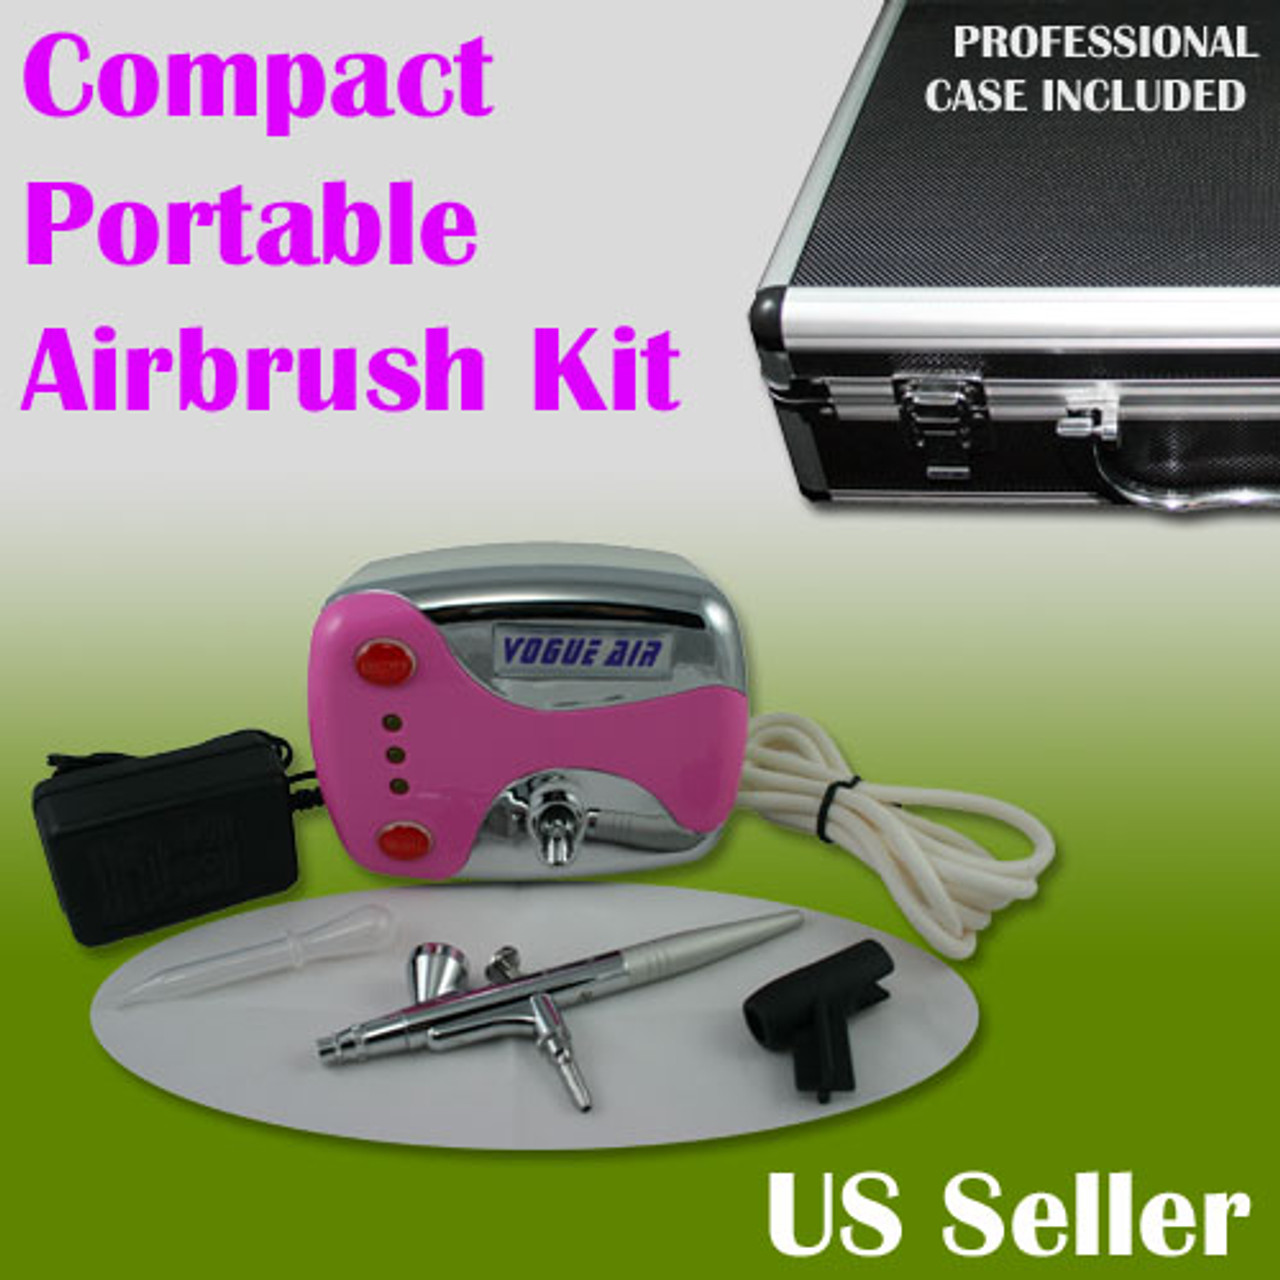 Compact Portable Airbrush Air Compressor Kit Gravity Feed Spray Makeup  Tattoo